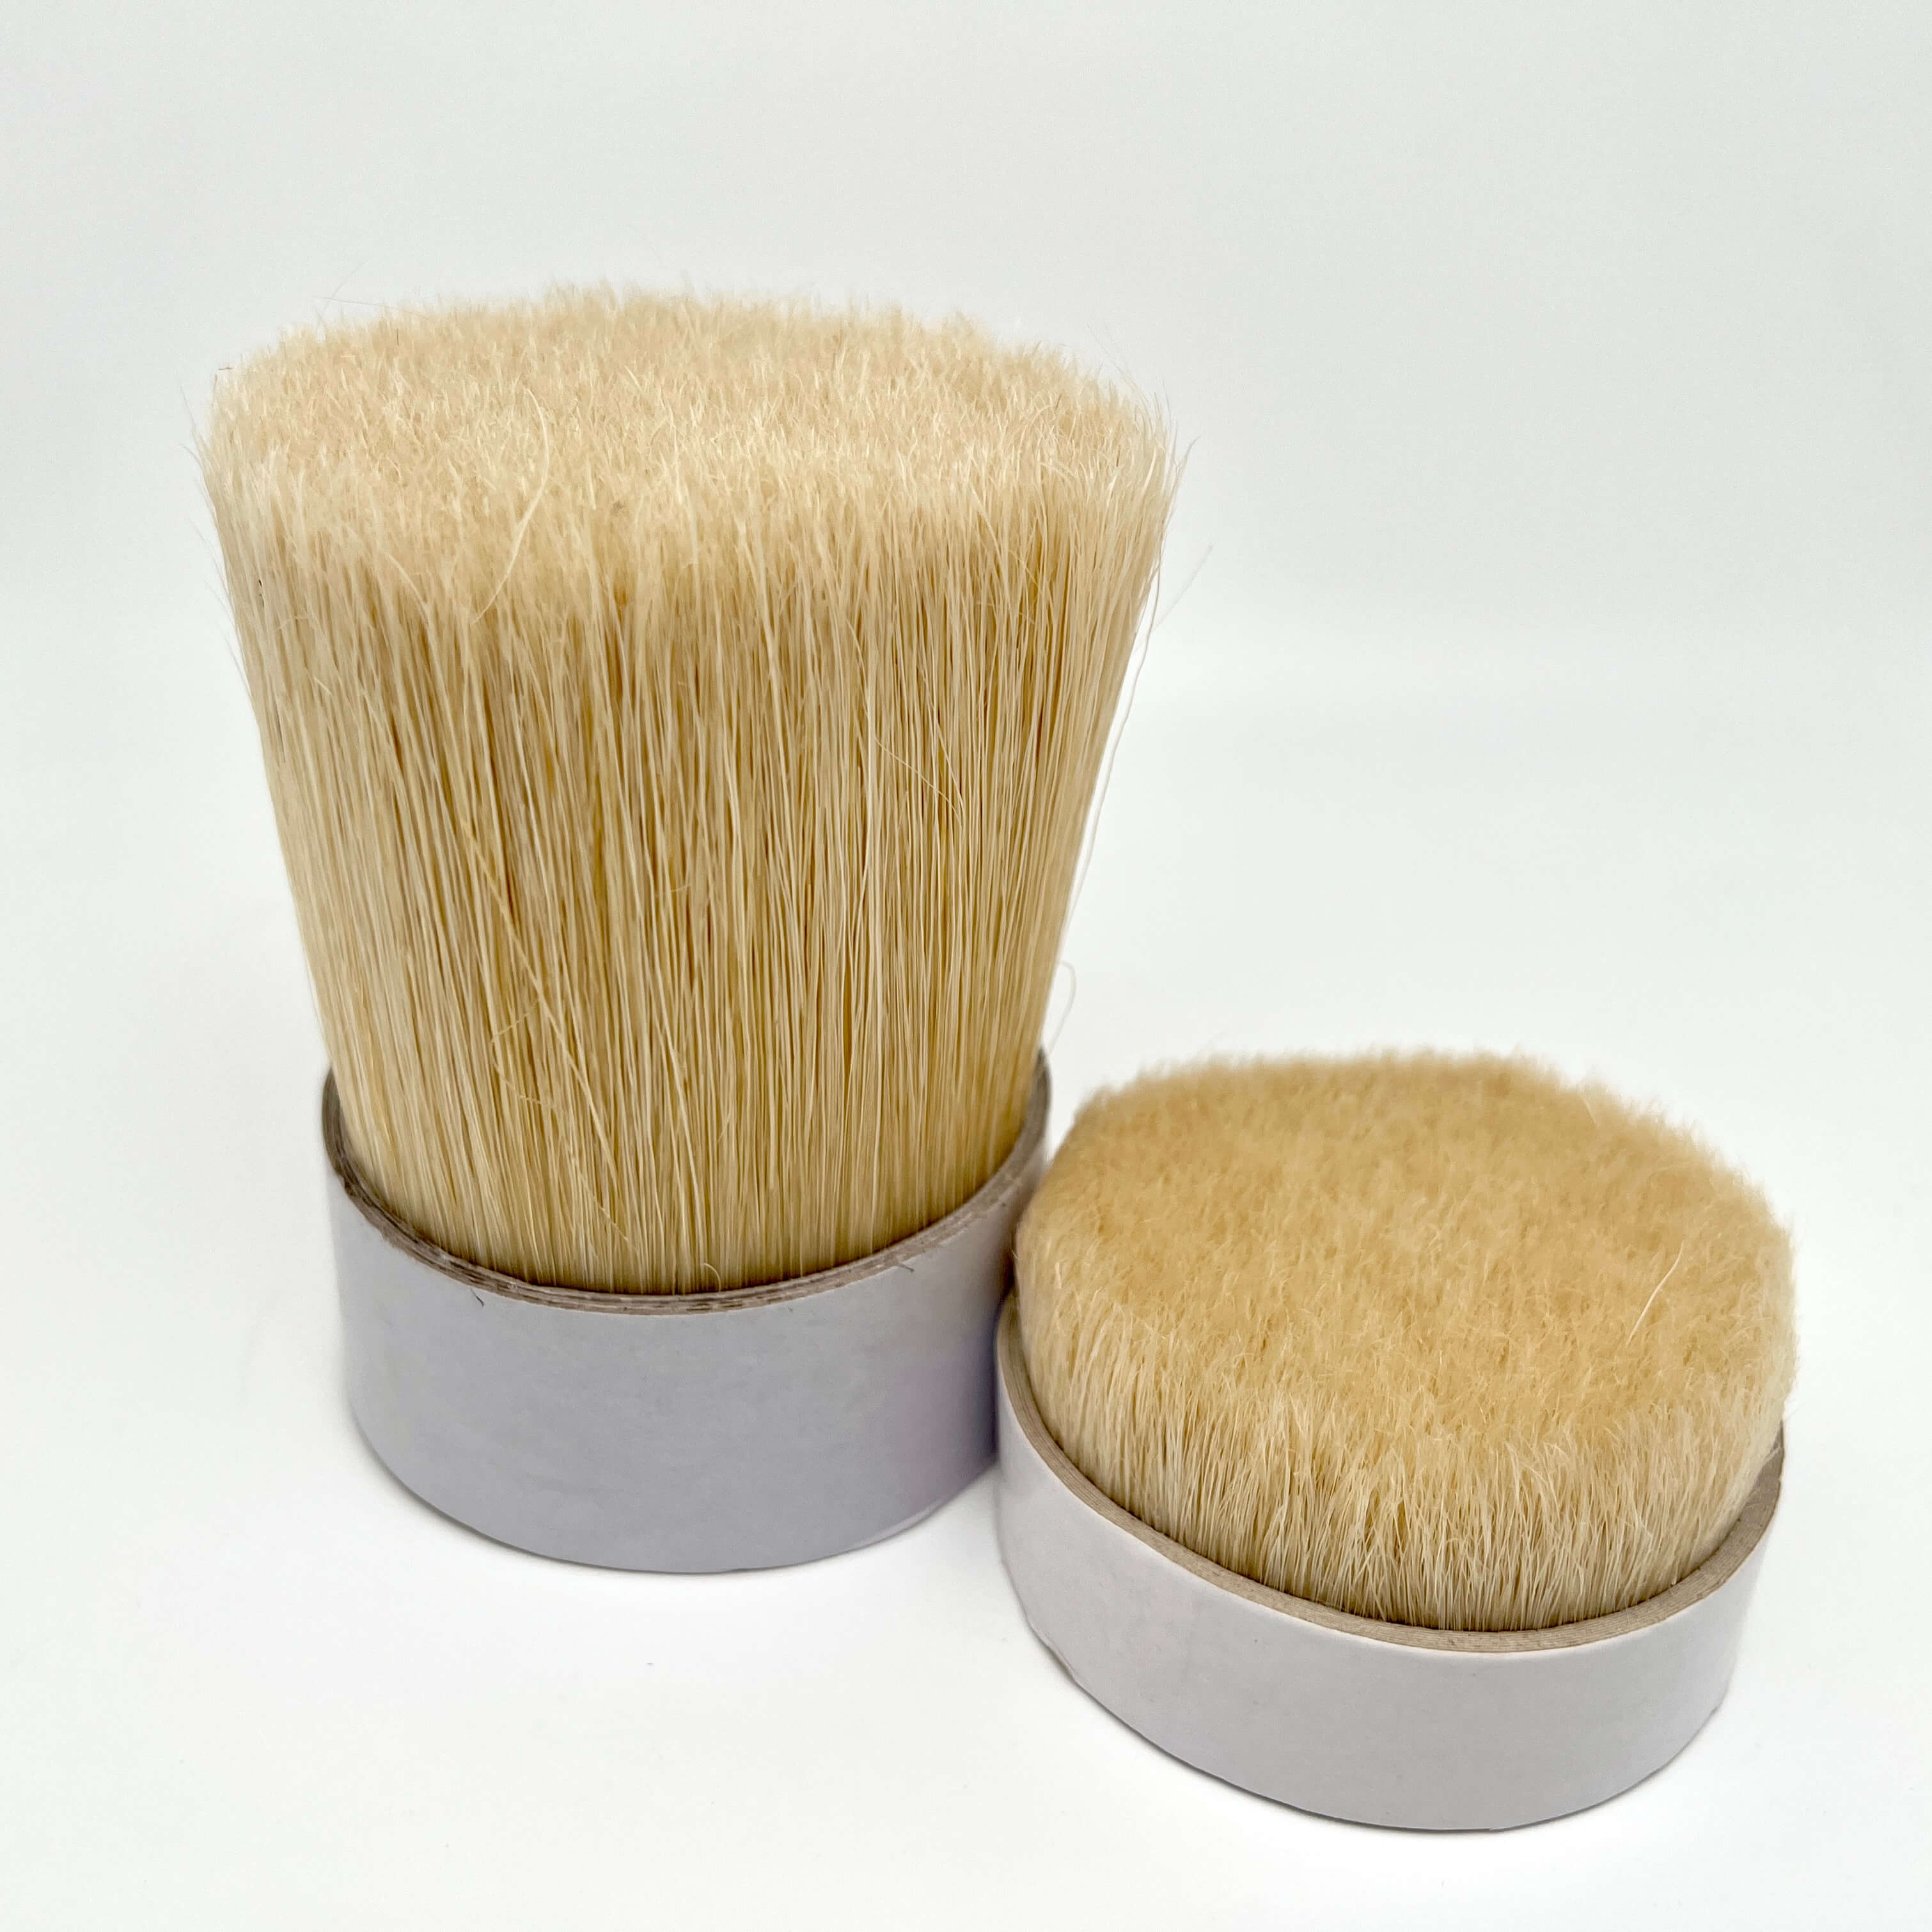 Why do people use boar bristle brushes?